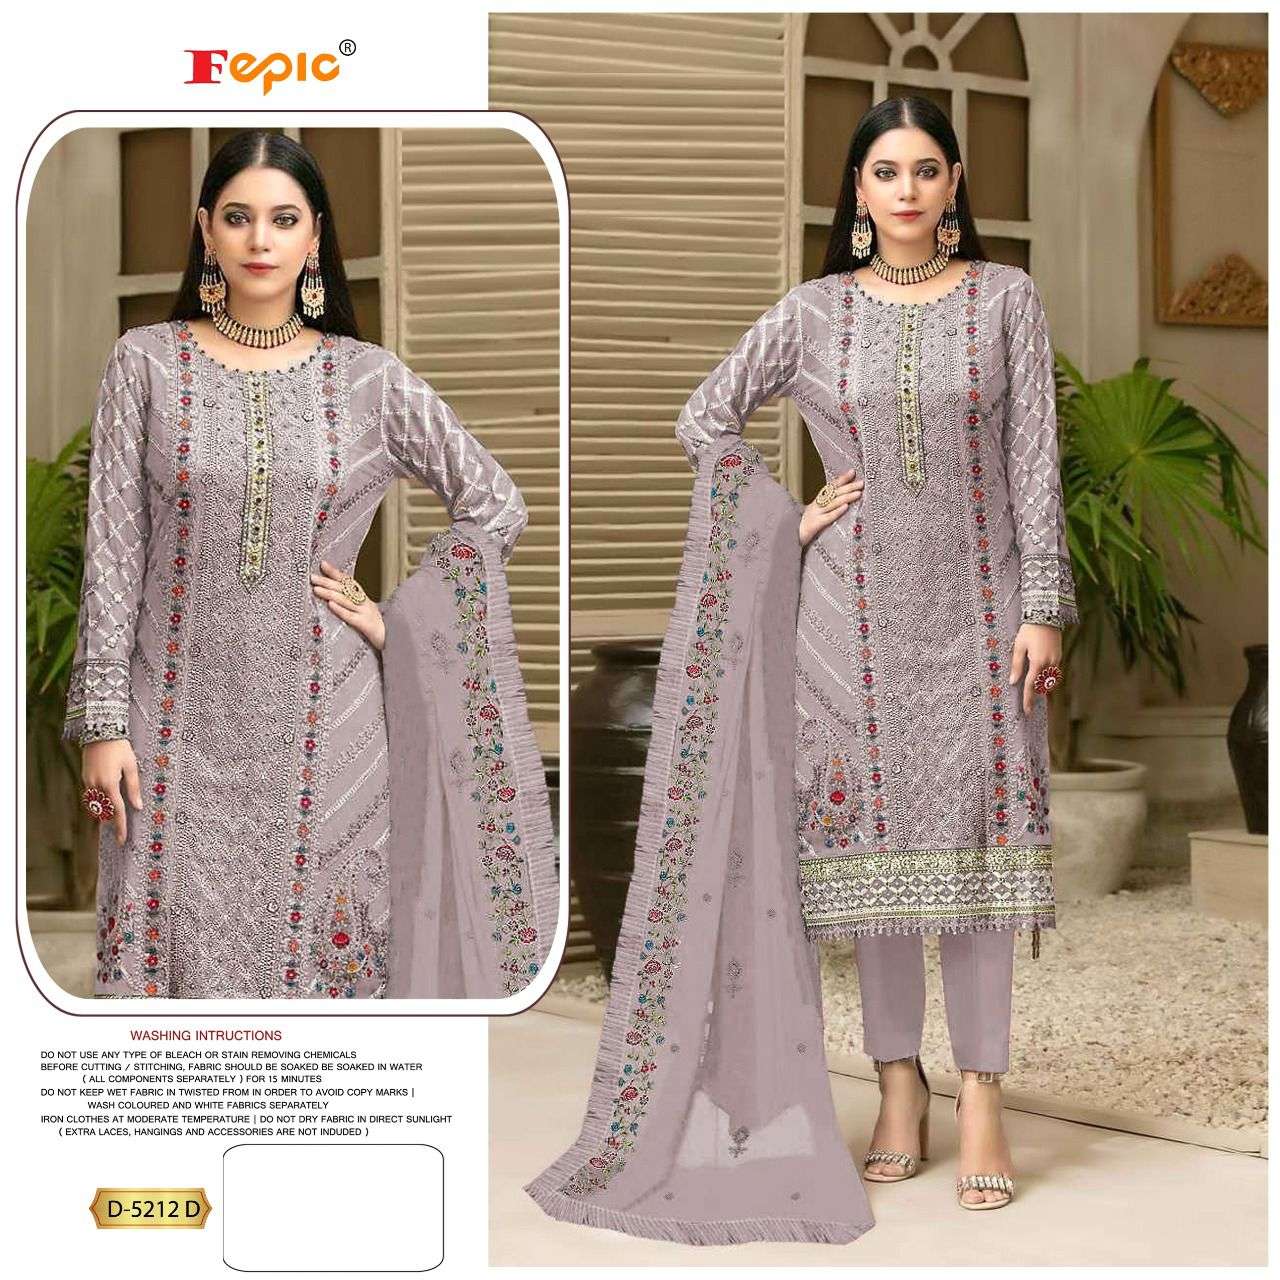 FEPIC PRESENTS ROSEMEEN DNO 5212A - 5212D SERIES INDIAN WOMEN HEAVY  PAKISTANI STRIAGHT PARTY WEDDING SALWAR PANT SUIT MUSLIM ABAYA WEAR  COLLECTION 3496